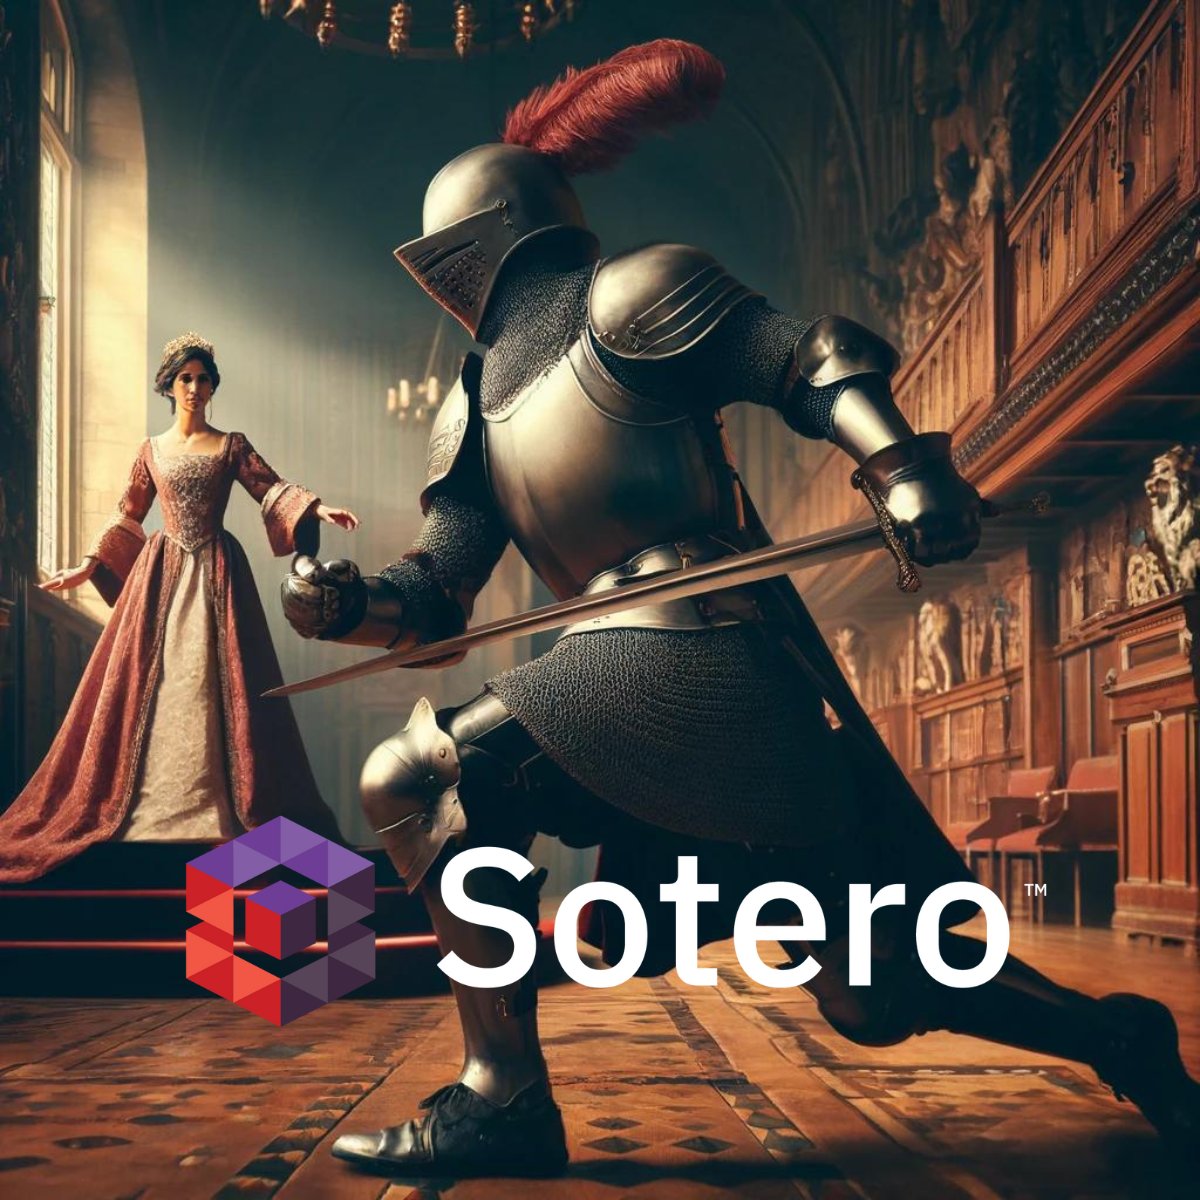 Cyber threats can't end your reign if Sotero stands guard. Like knights clad in armor, we protect the core of your kingdom—your data. Always vigilant, always defending. bit.ly/49vdmec #ransomwaresolution #ransomwareprevention